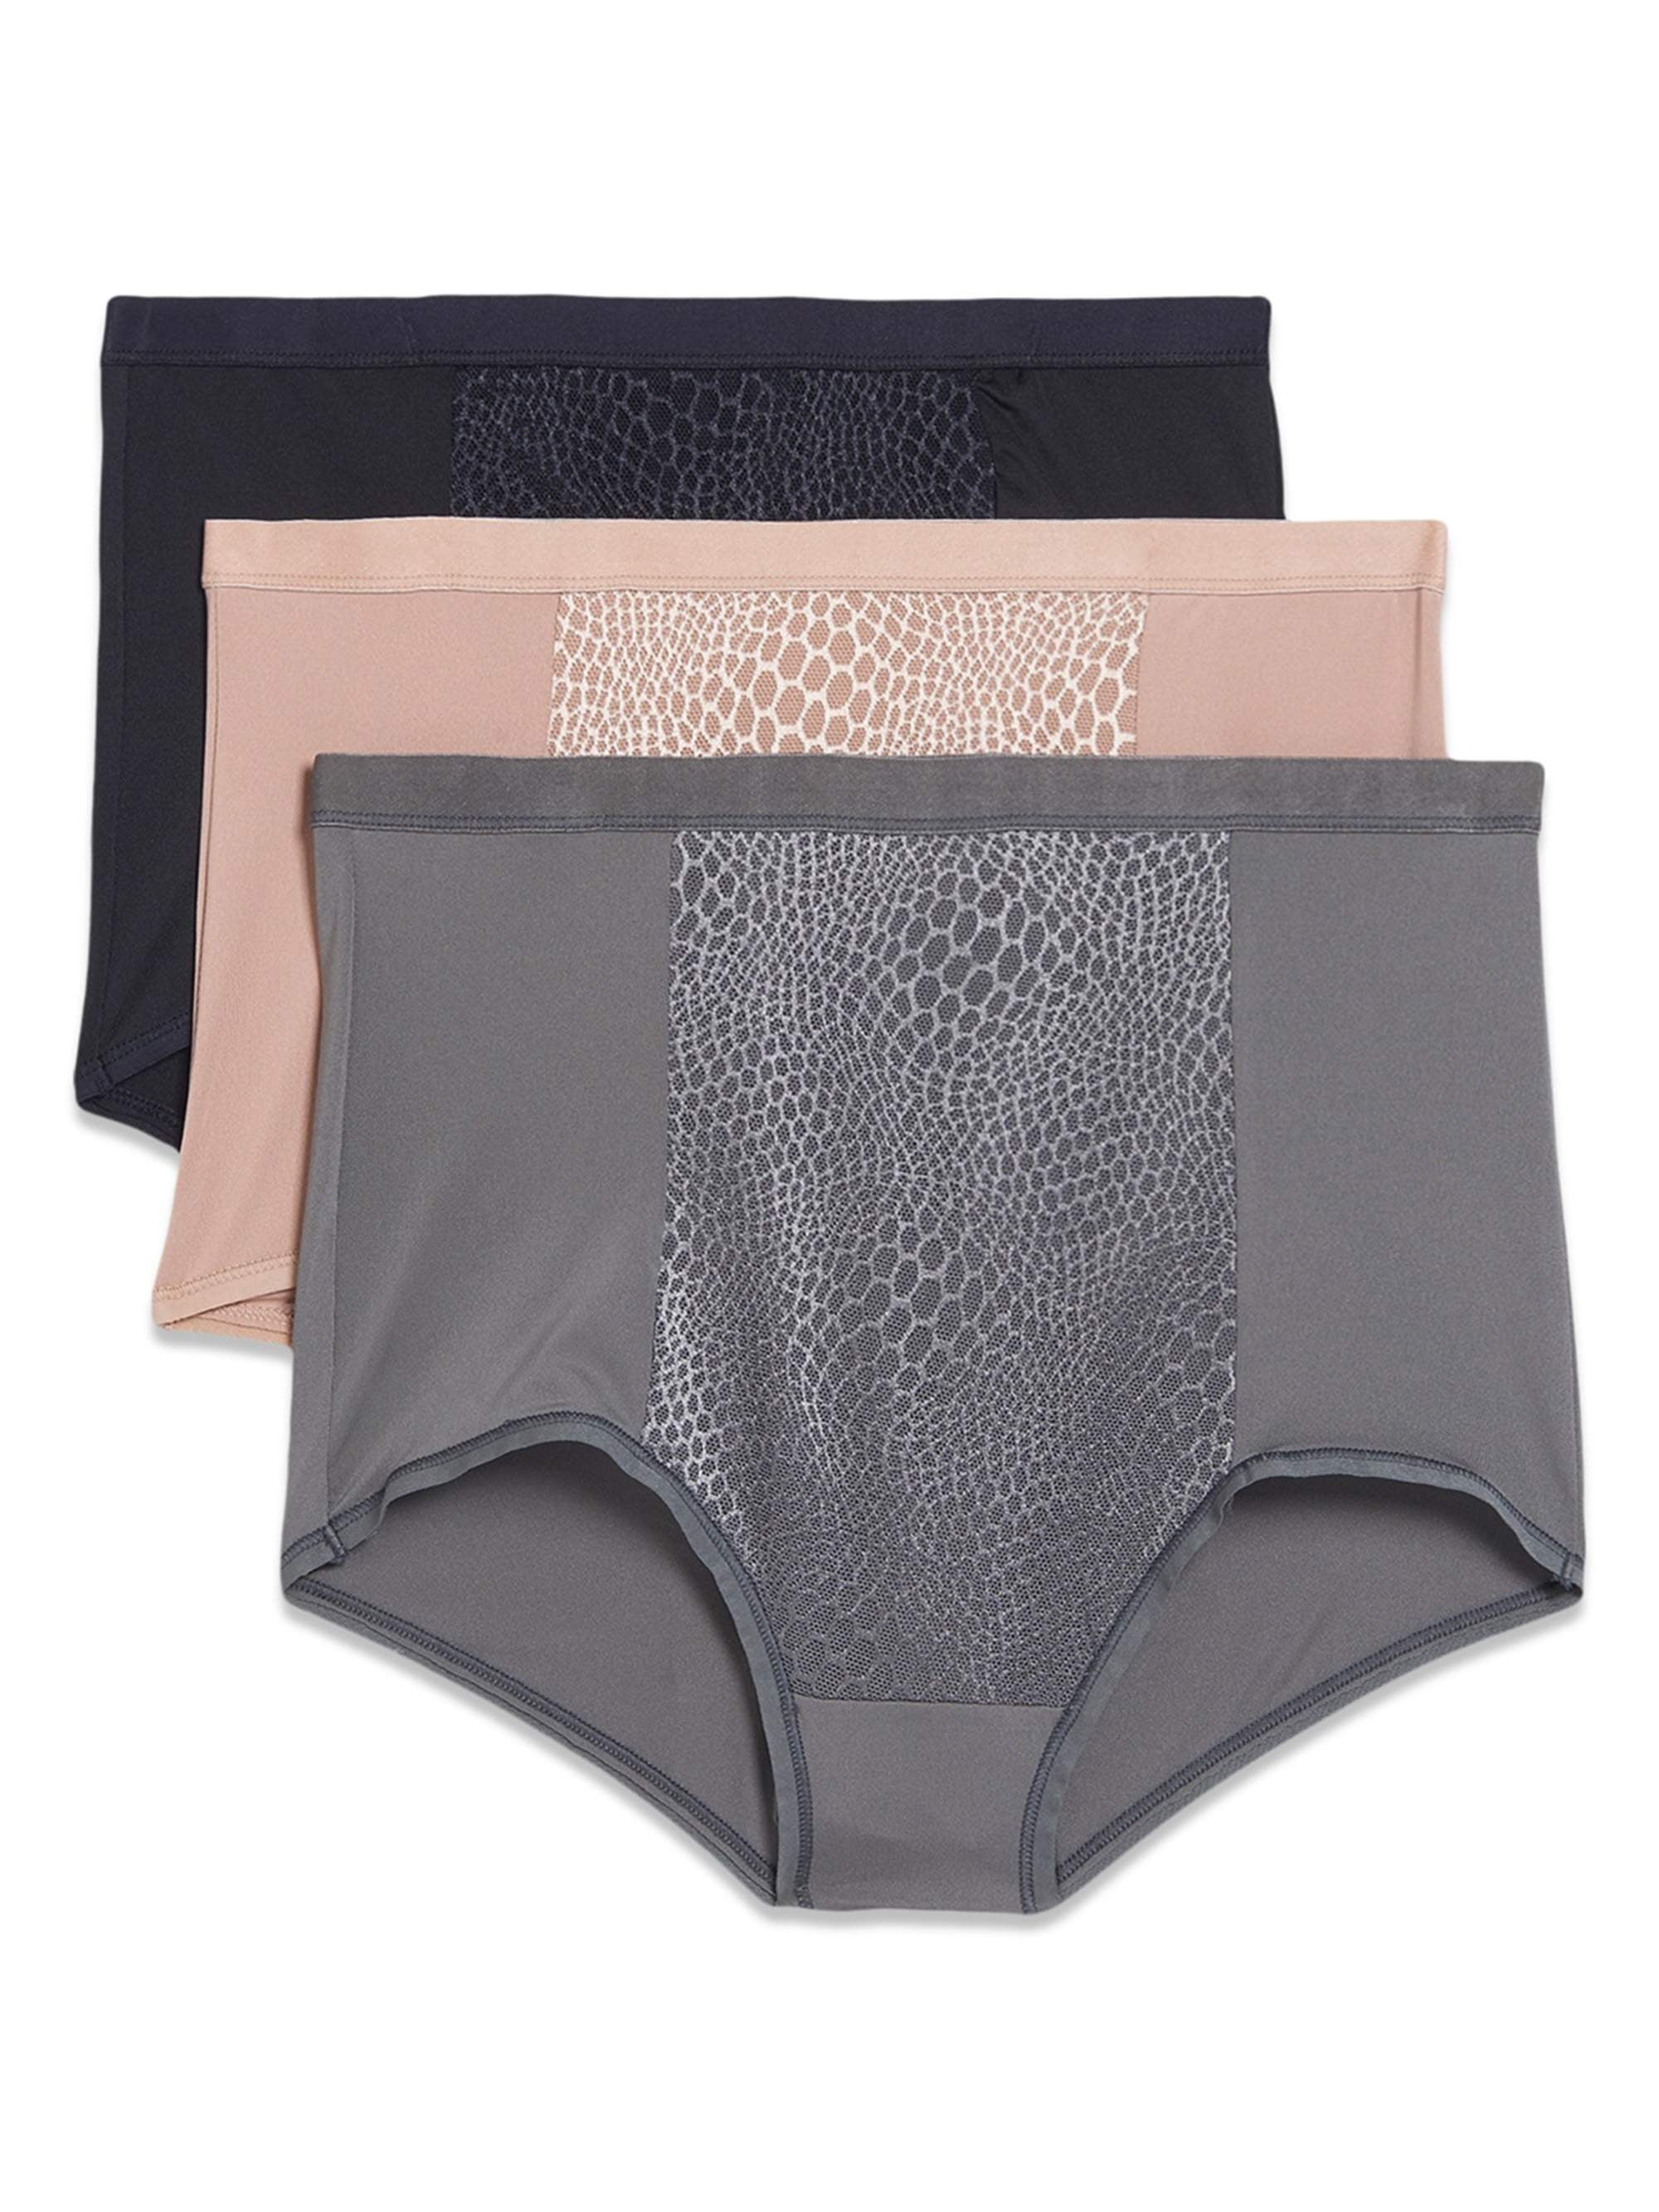 Warner's Women's Blissful Benefits Tummy Smoothing Hipster Panties Multipack 